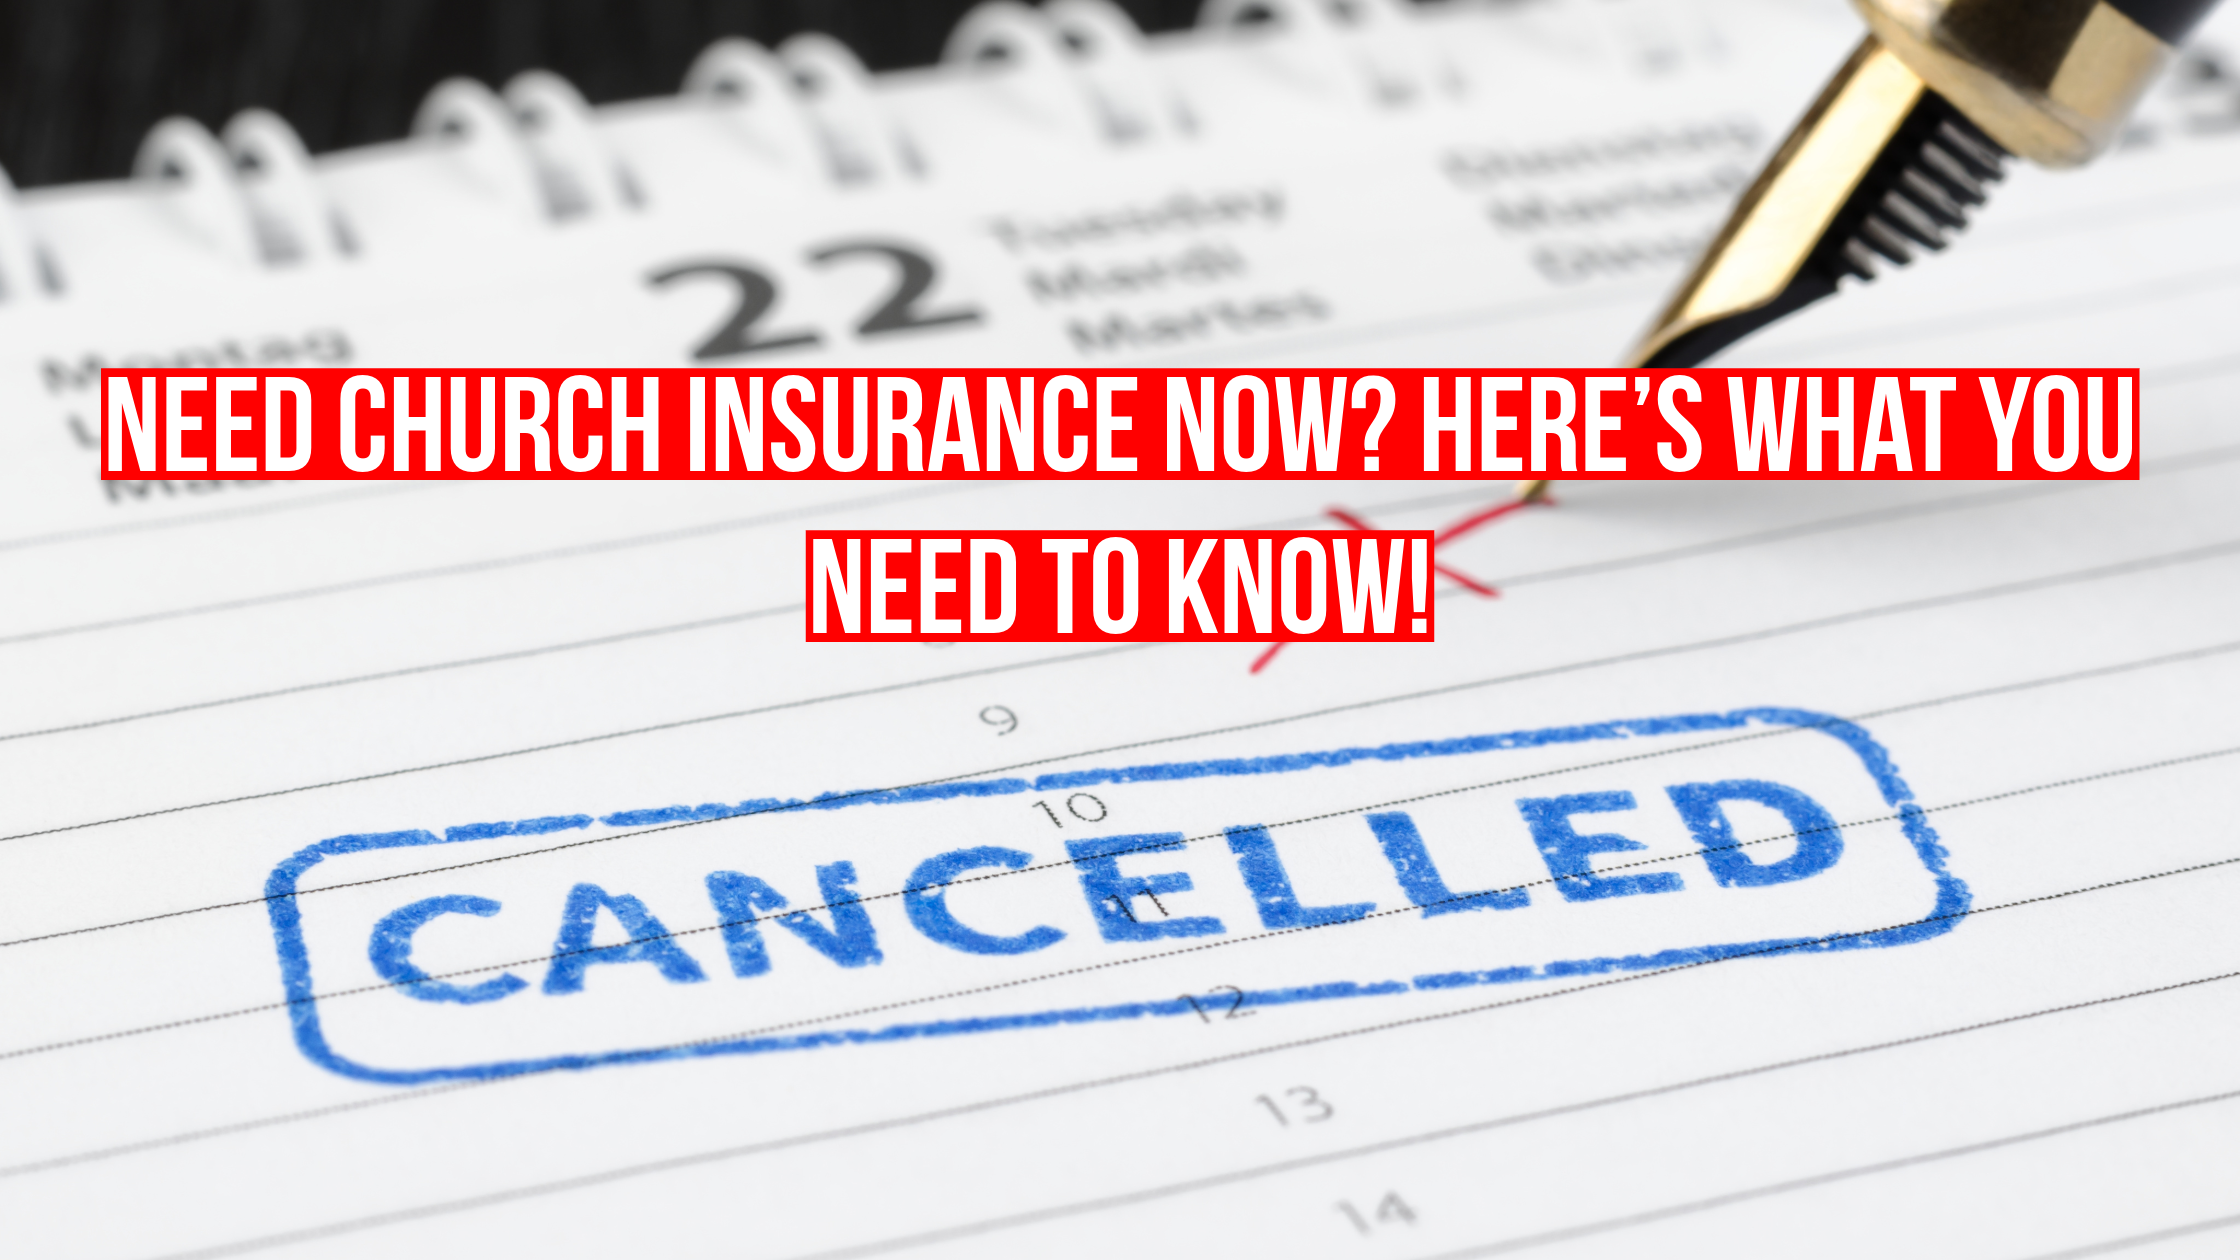 Need Church Insurance Now? Here’s What You Need To Know!